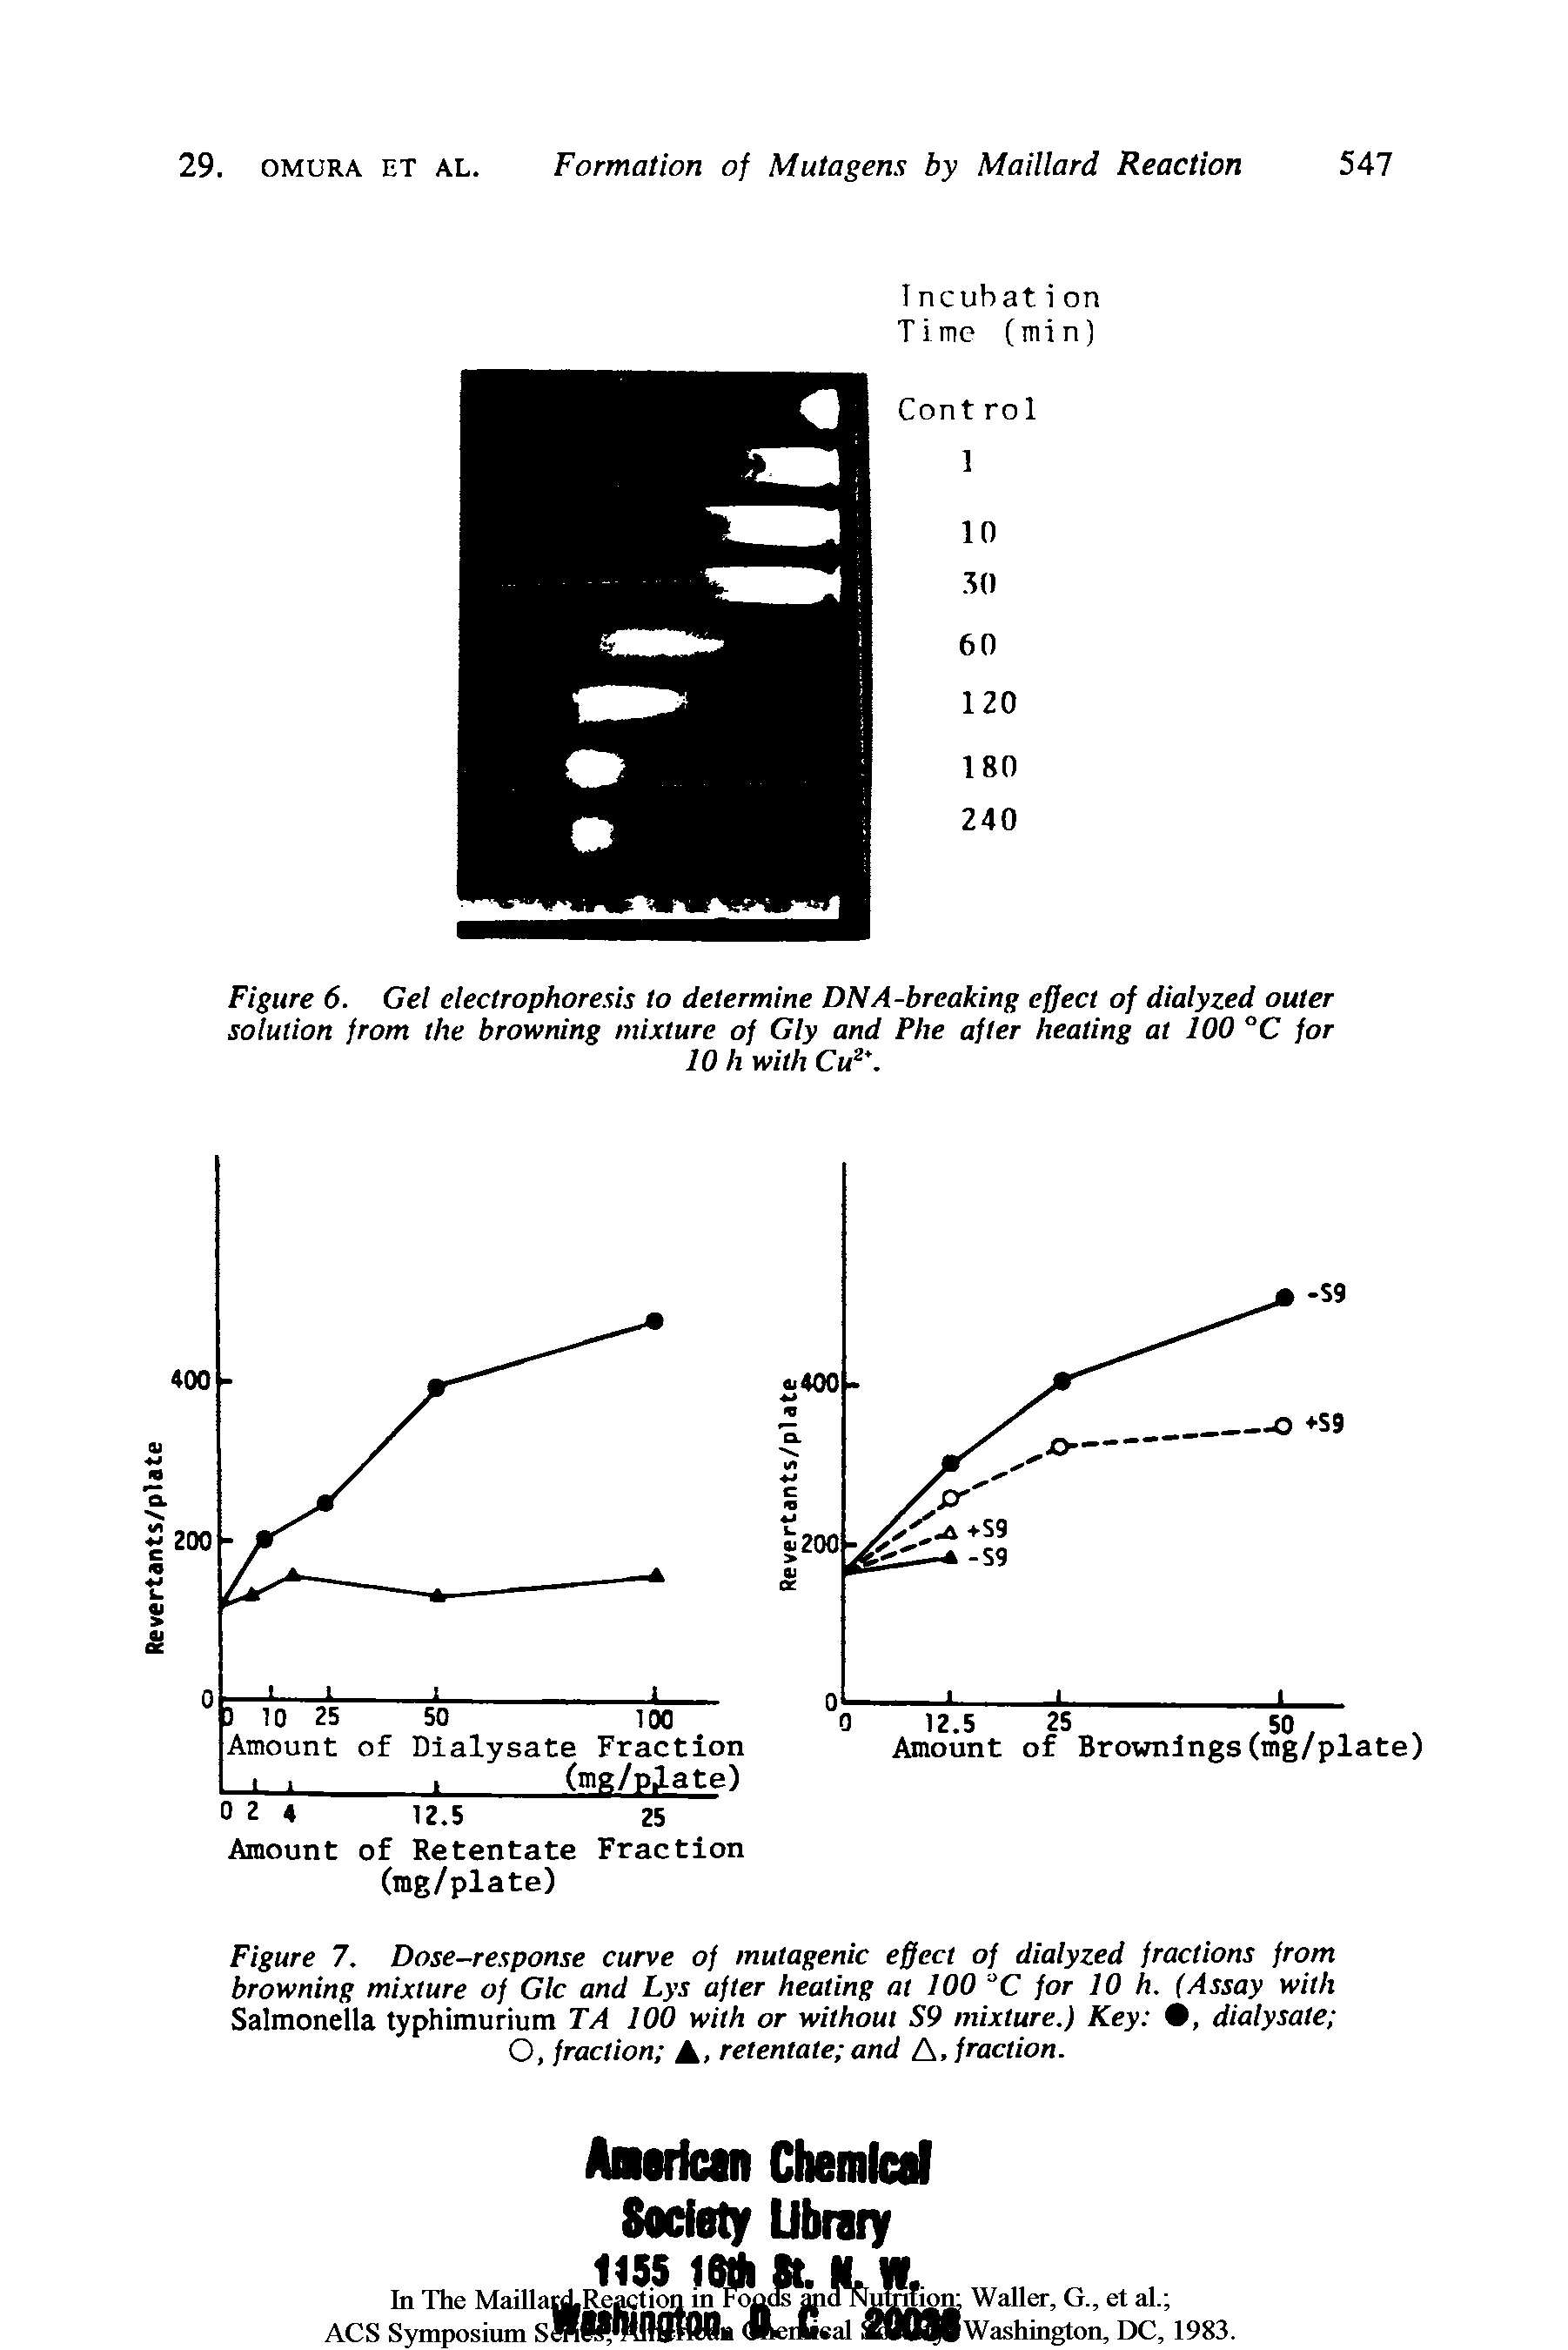 Figure 7. Dose-response curve of mutagenic effect of dialyzed fractions from browning mixture of Glc and Lys after heating at 100 C for 10 h. (Assay with Salmonella typhimurium TA 100 with or without S9 mixture.) Key , dialysate O, fraction A. retentate and A, fraction.